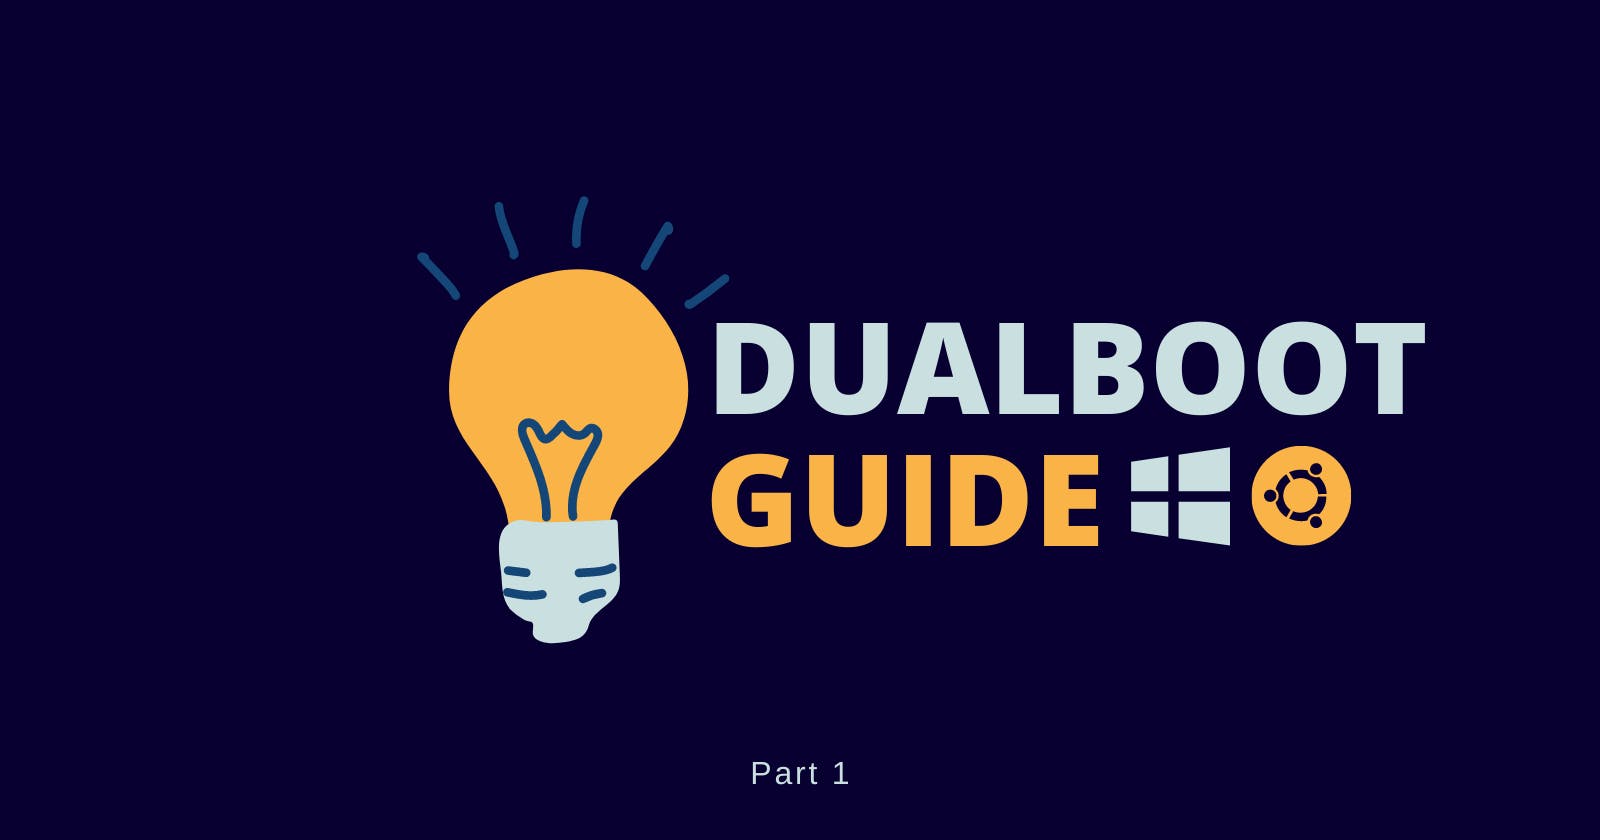 A beginner's guide to Dualbooting Windows with Ubuntu: Part 1